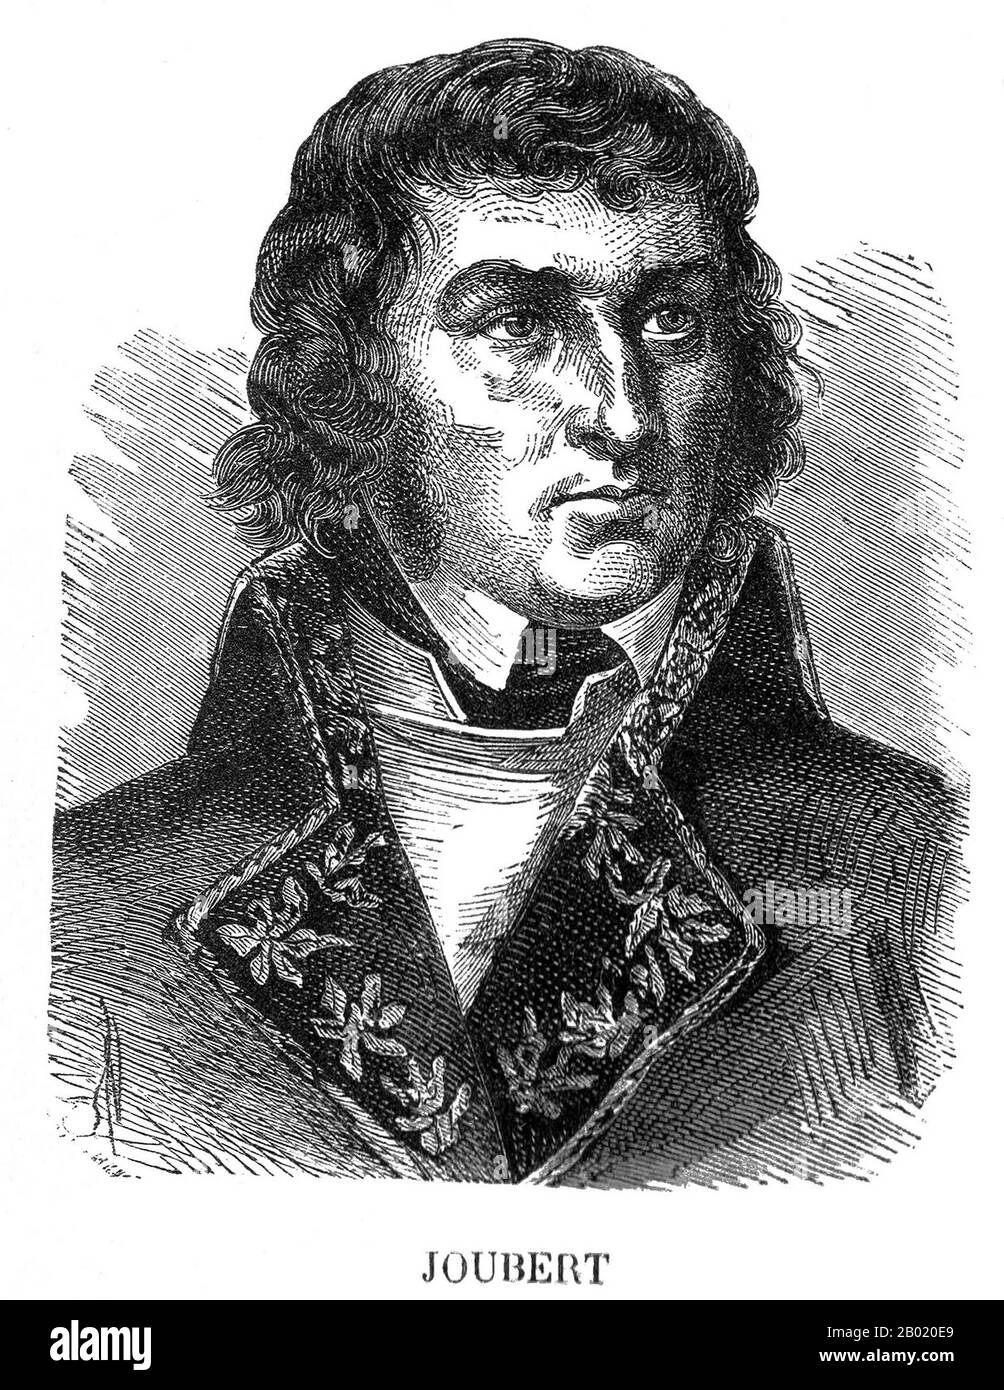 Joseph Joubert (7 May 1754 in Montignac, Périgord – 4 May 1824 in Paris) was a French moralist and essayist, remembered today largely for his Pensées (Thoughts), which was published posthumously.  From the age of fourteen Joubert attended a religious college in Toulouse, where he later taught until 1776. In 1778 he went to Paris where he met D'Alembert and Diderot, amongst others, and later became friends with a young writer and diplomat, Chateaubriand.  He alternated between living in Paris with his friends and life in the privacy of the countryside in Villeneuve-sur-Yonne. He was appointed i Stock Photo